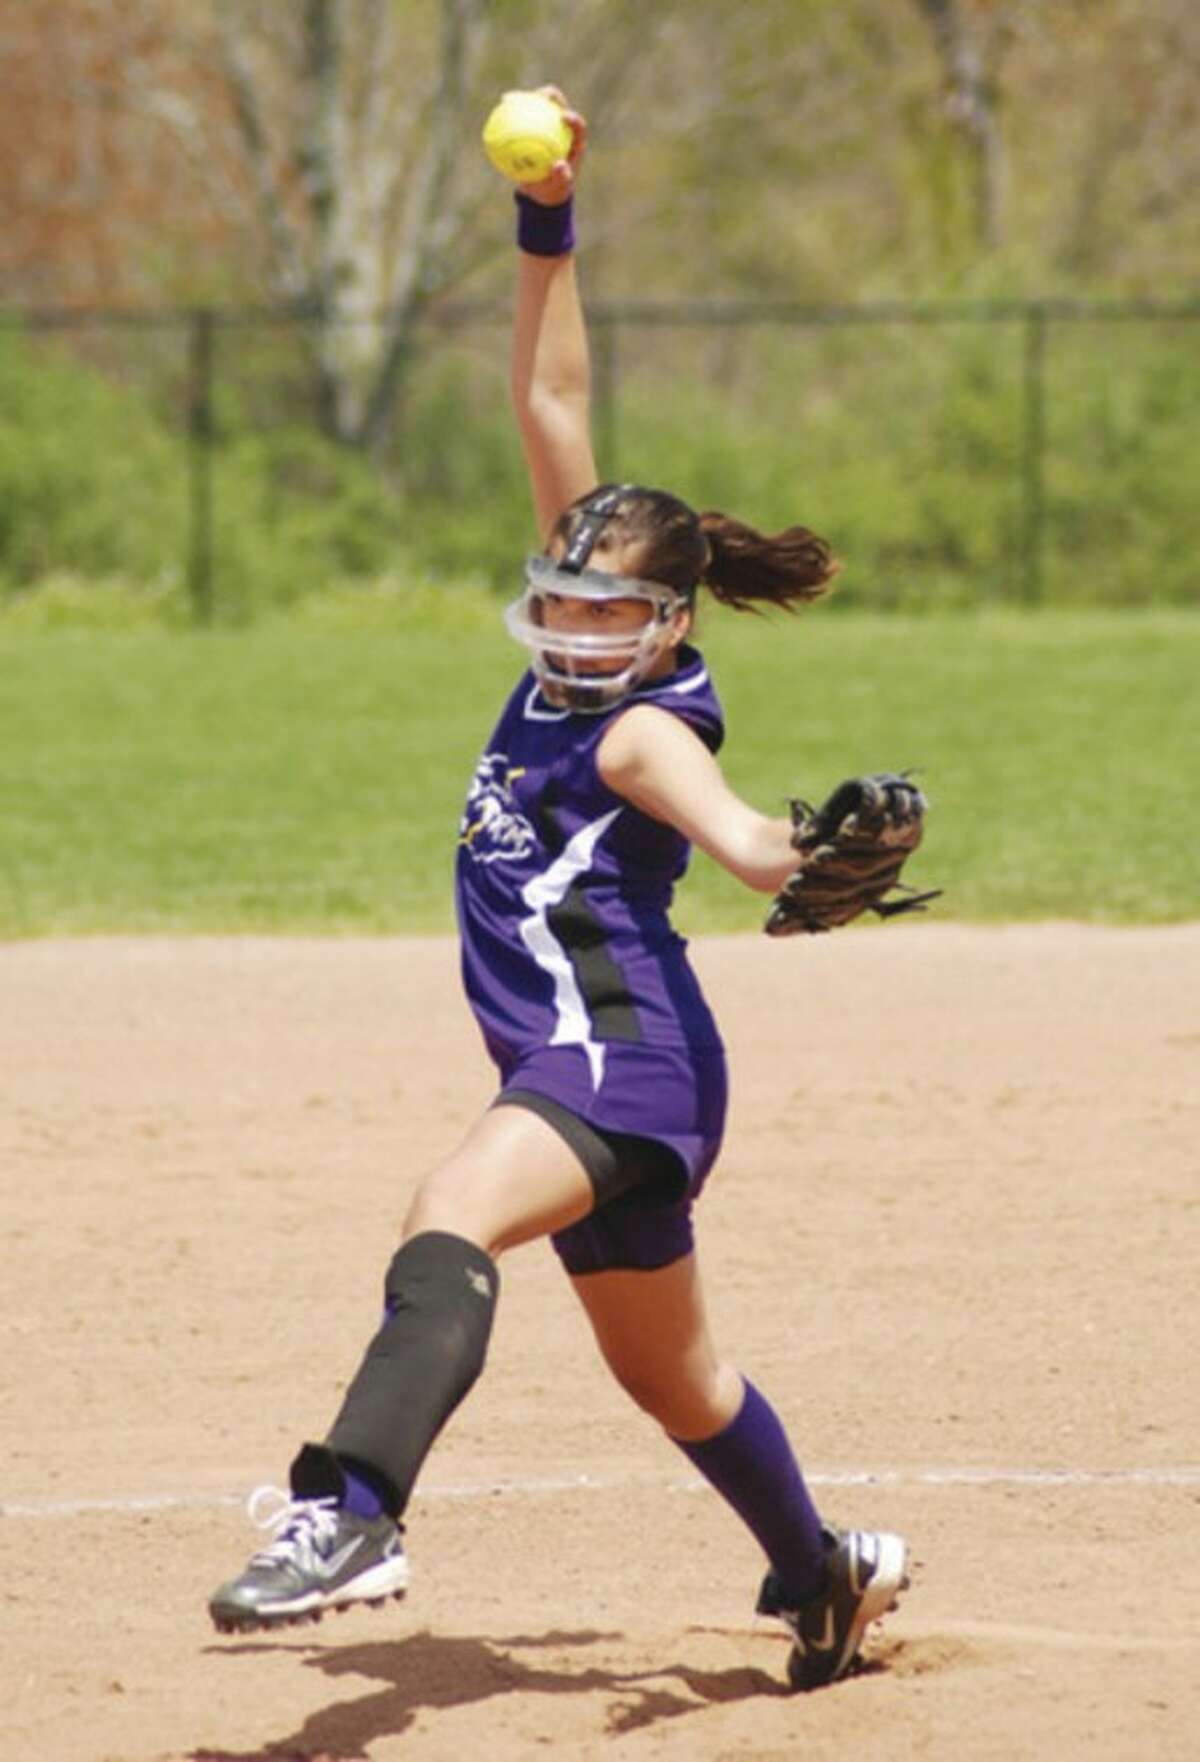 Youth Softball - A successful Storm is created in Stamford